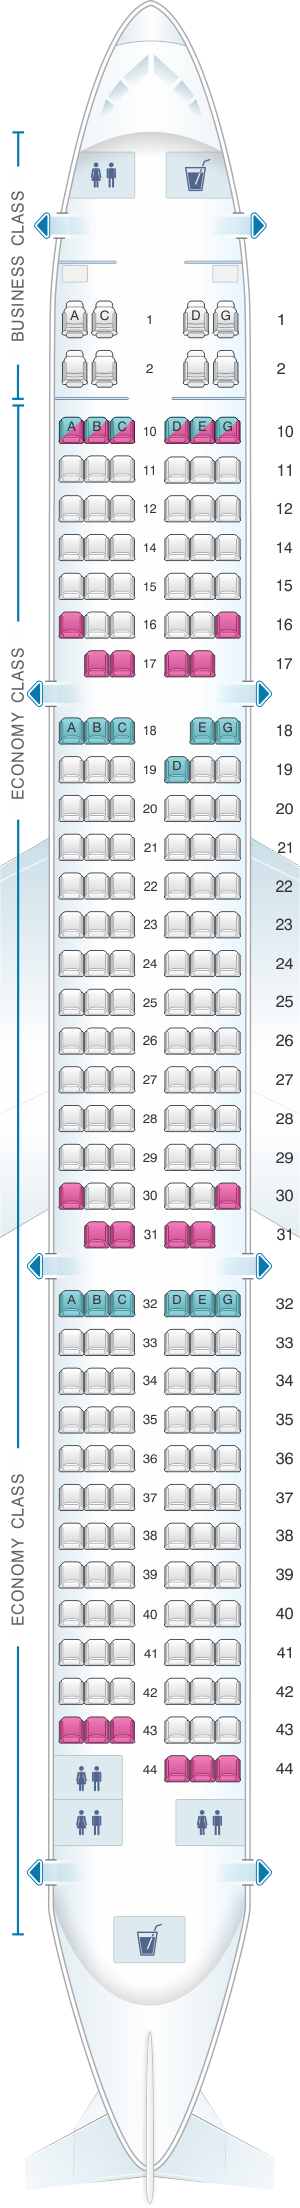 Vietnam Airlines Airbus A321 Seat Map